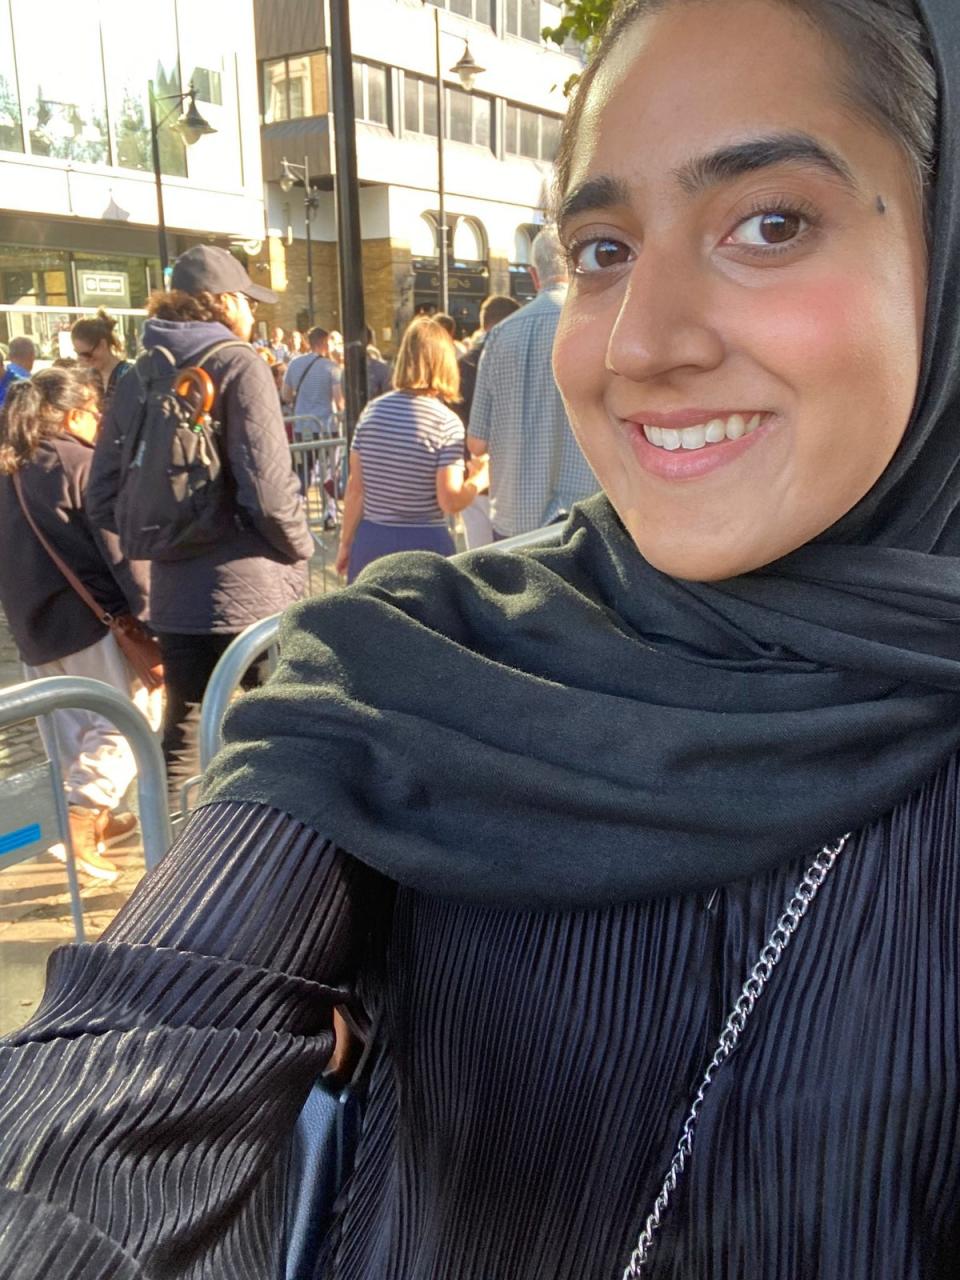 Maryam Zakir-Hussain at the back of the queue at London Bridge (Maryam Zakir-Hussain)